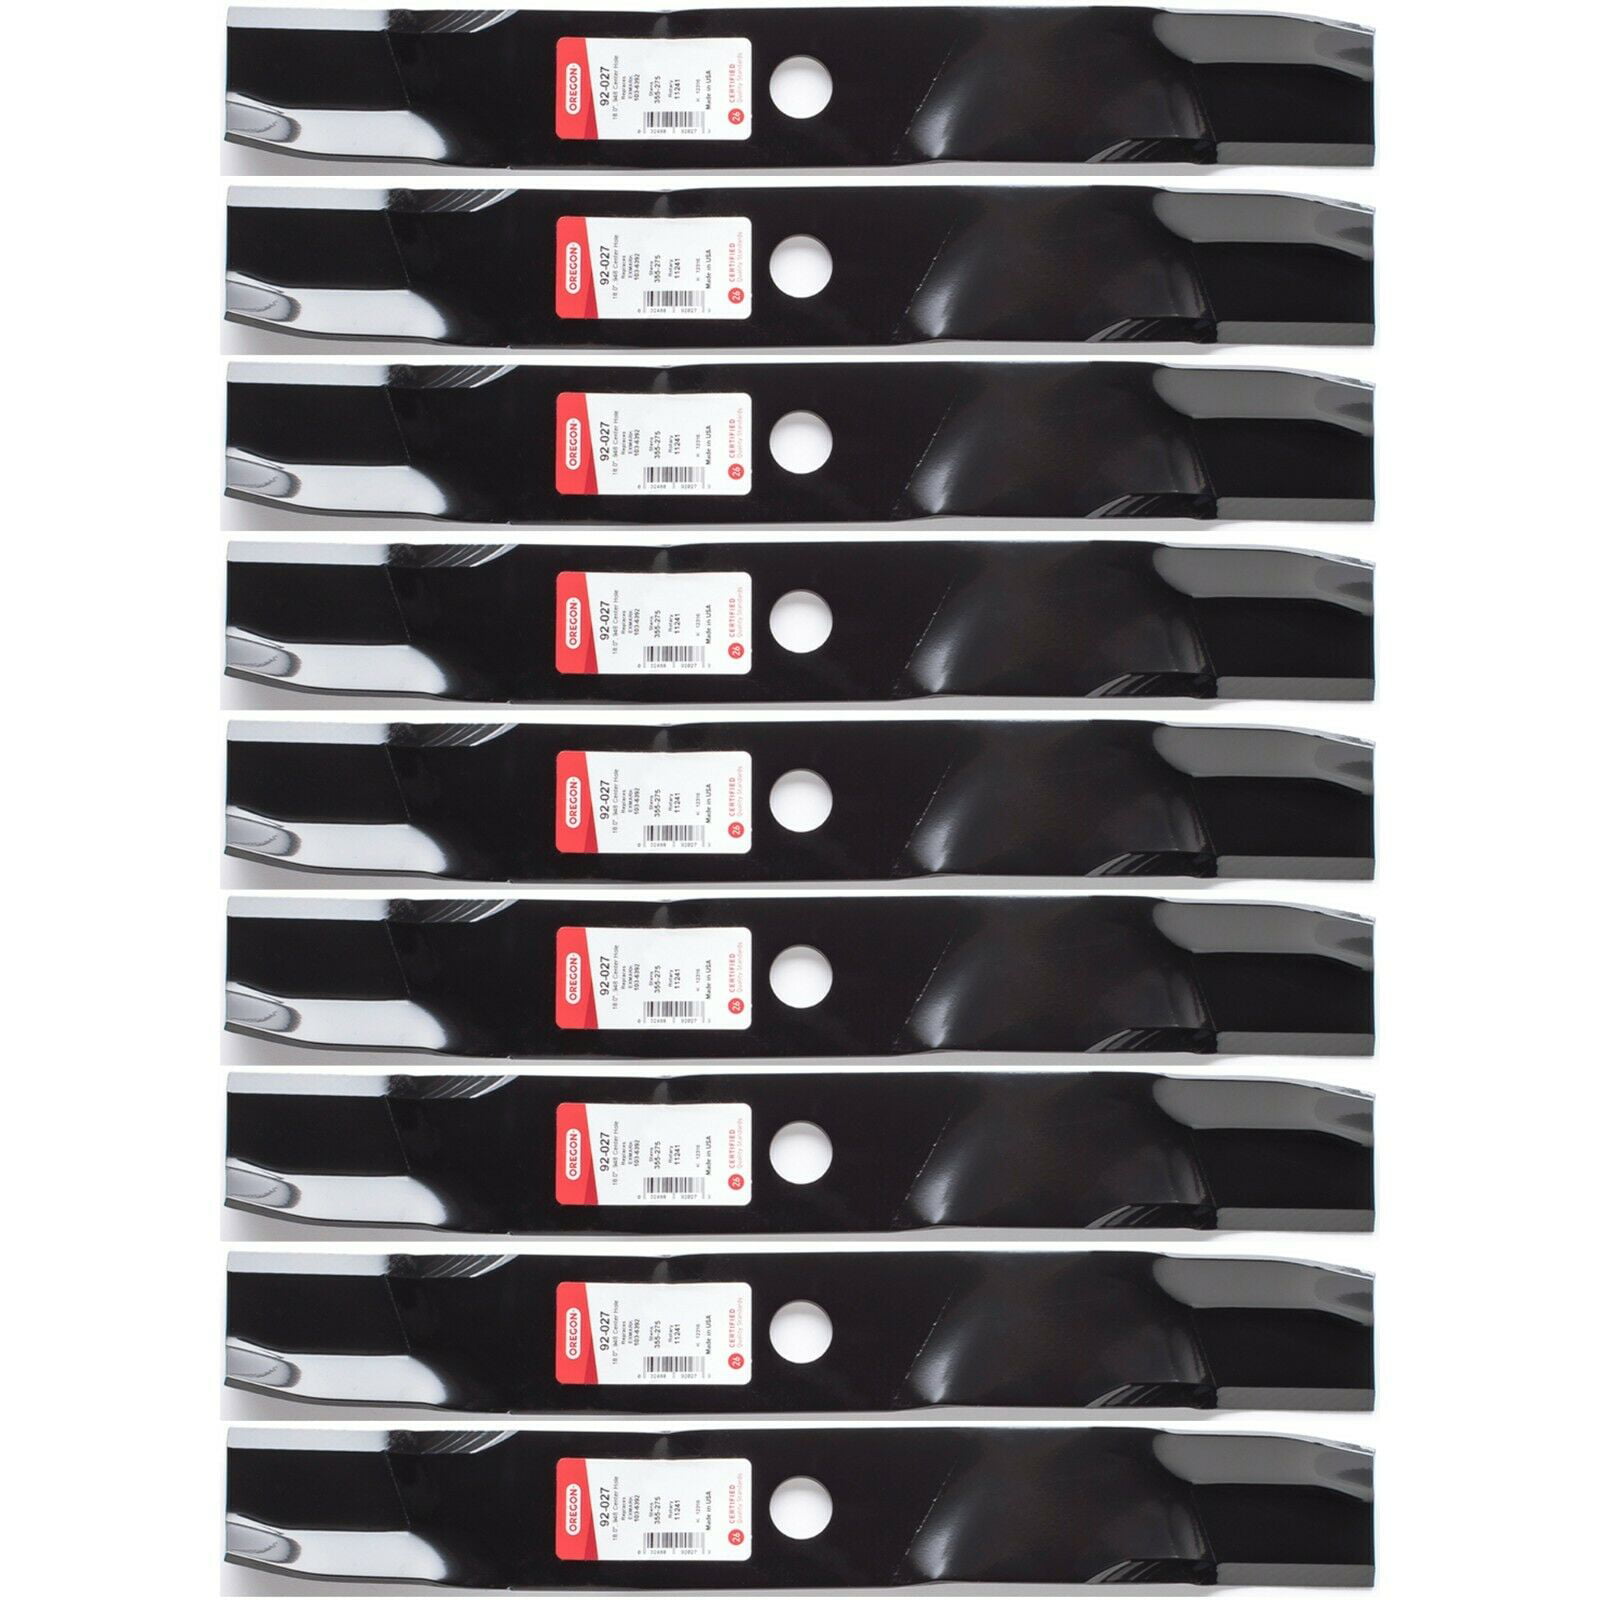 Details about   6PK Oregon 92-027 High Lift Blades for Exmark 52Ó Staris S-Series STS730GKA52400 